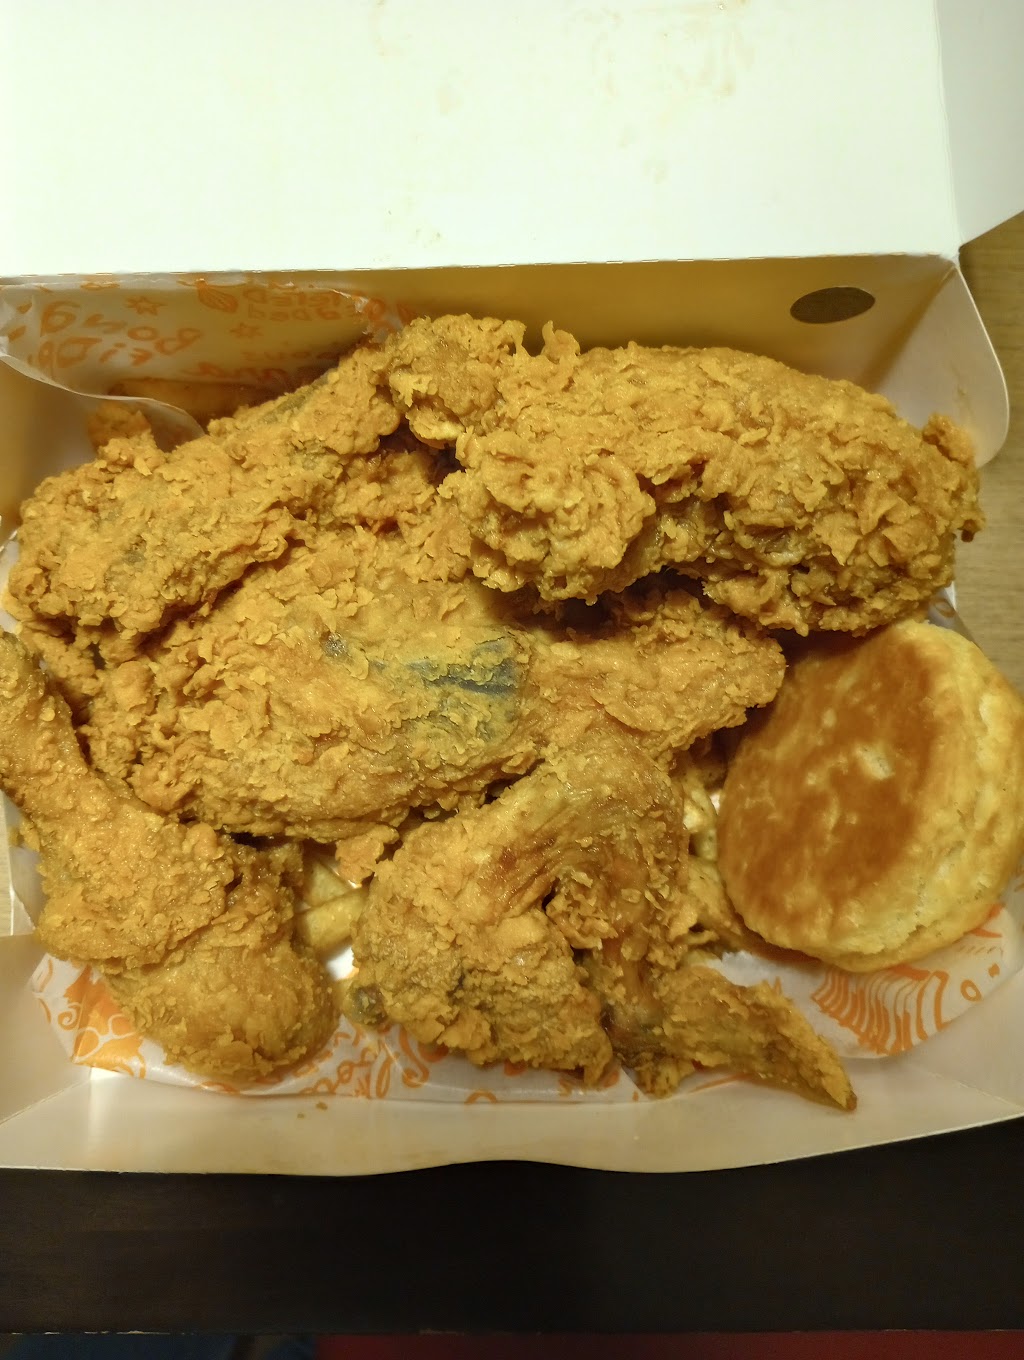 Popeyes Louisiana Kitchen | 60 N Research Pl, Central Islip, NY 11722 | Phone: (631) 439-0966